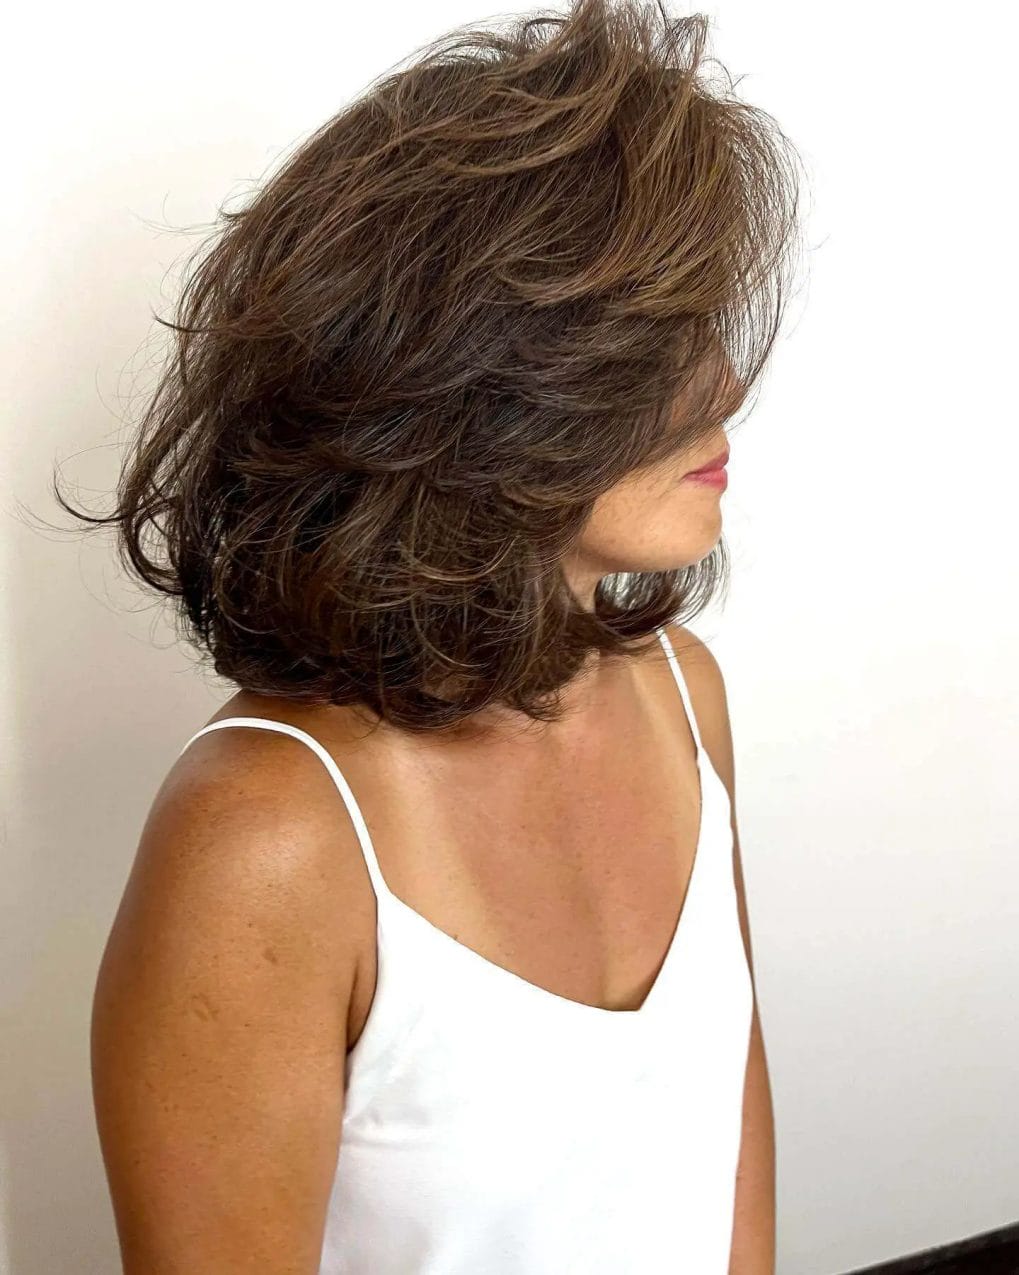 Voluminous tousled layered bob in warm brunette with subtle highlights.